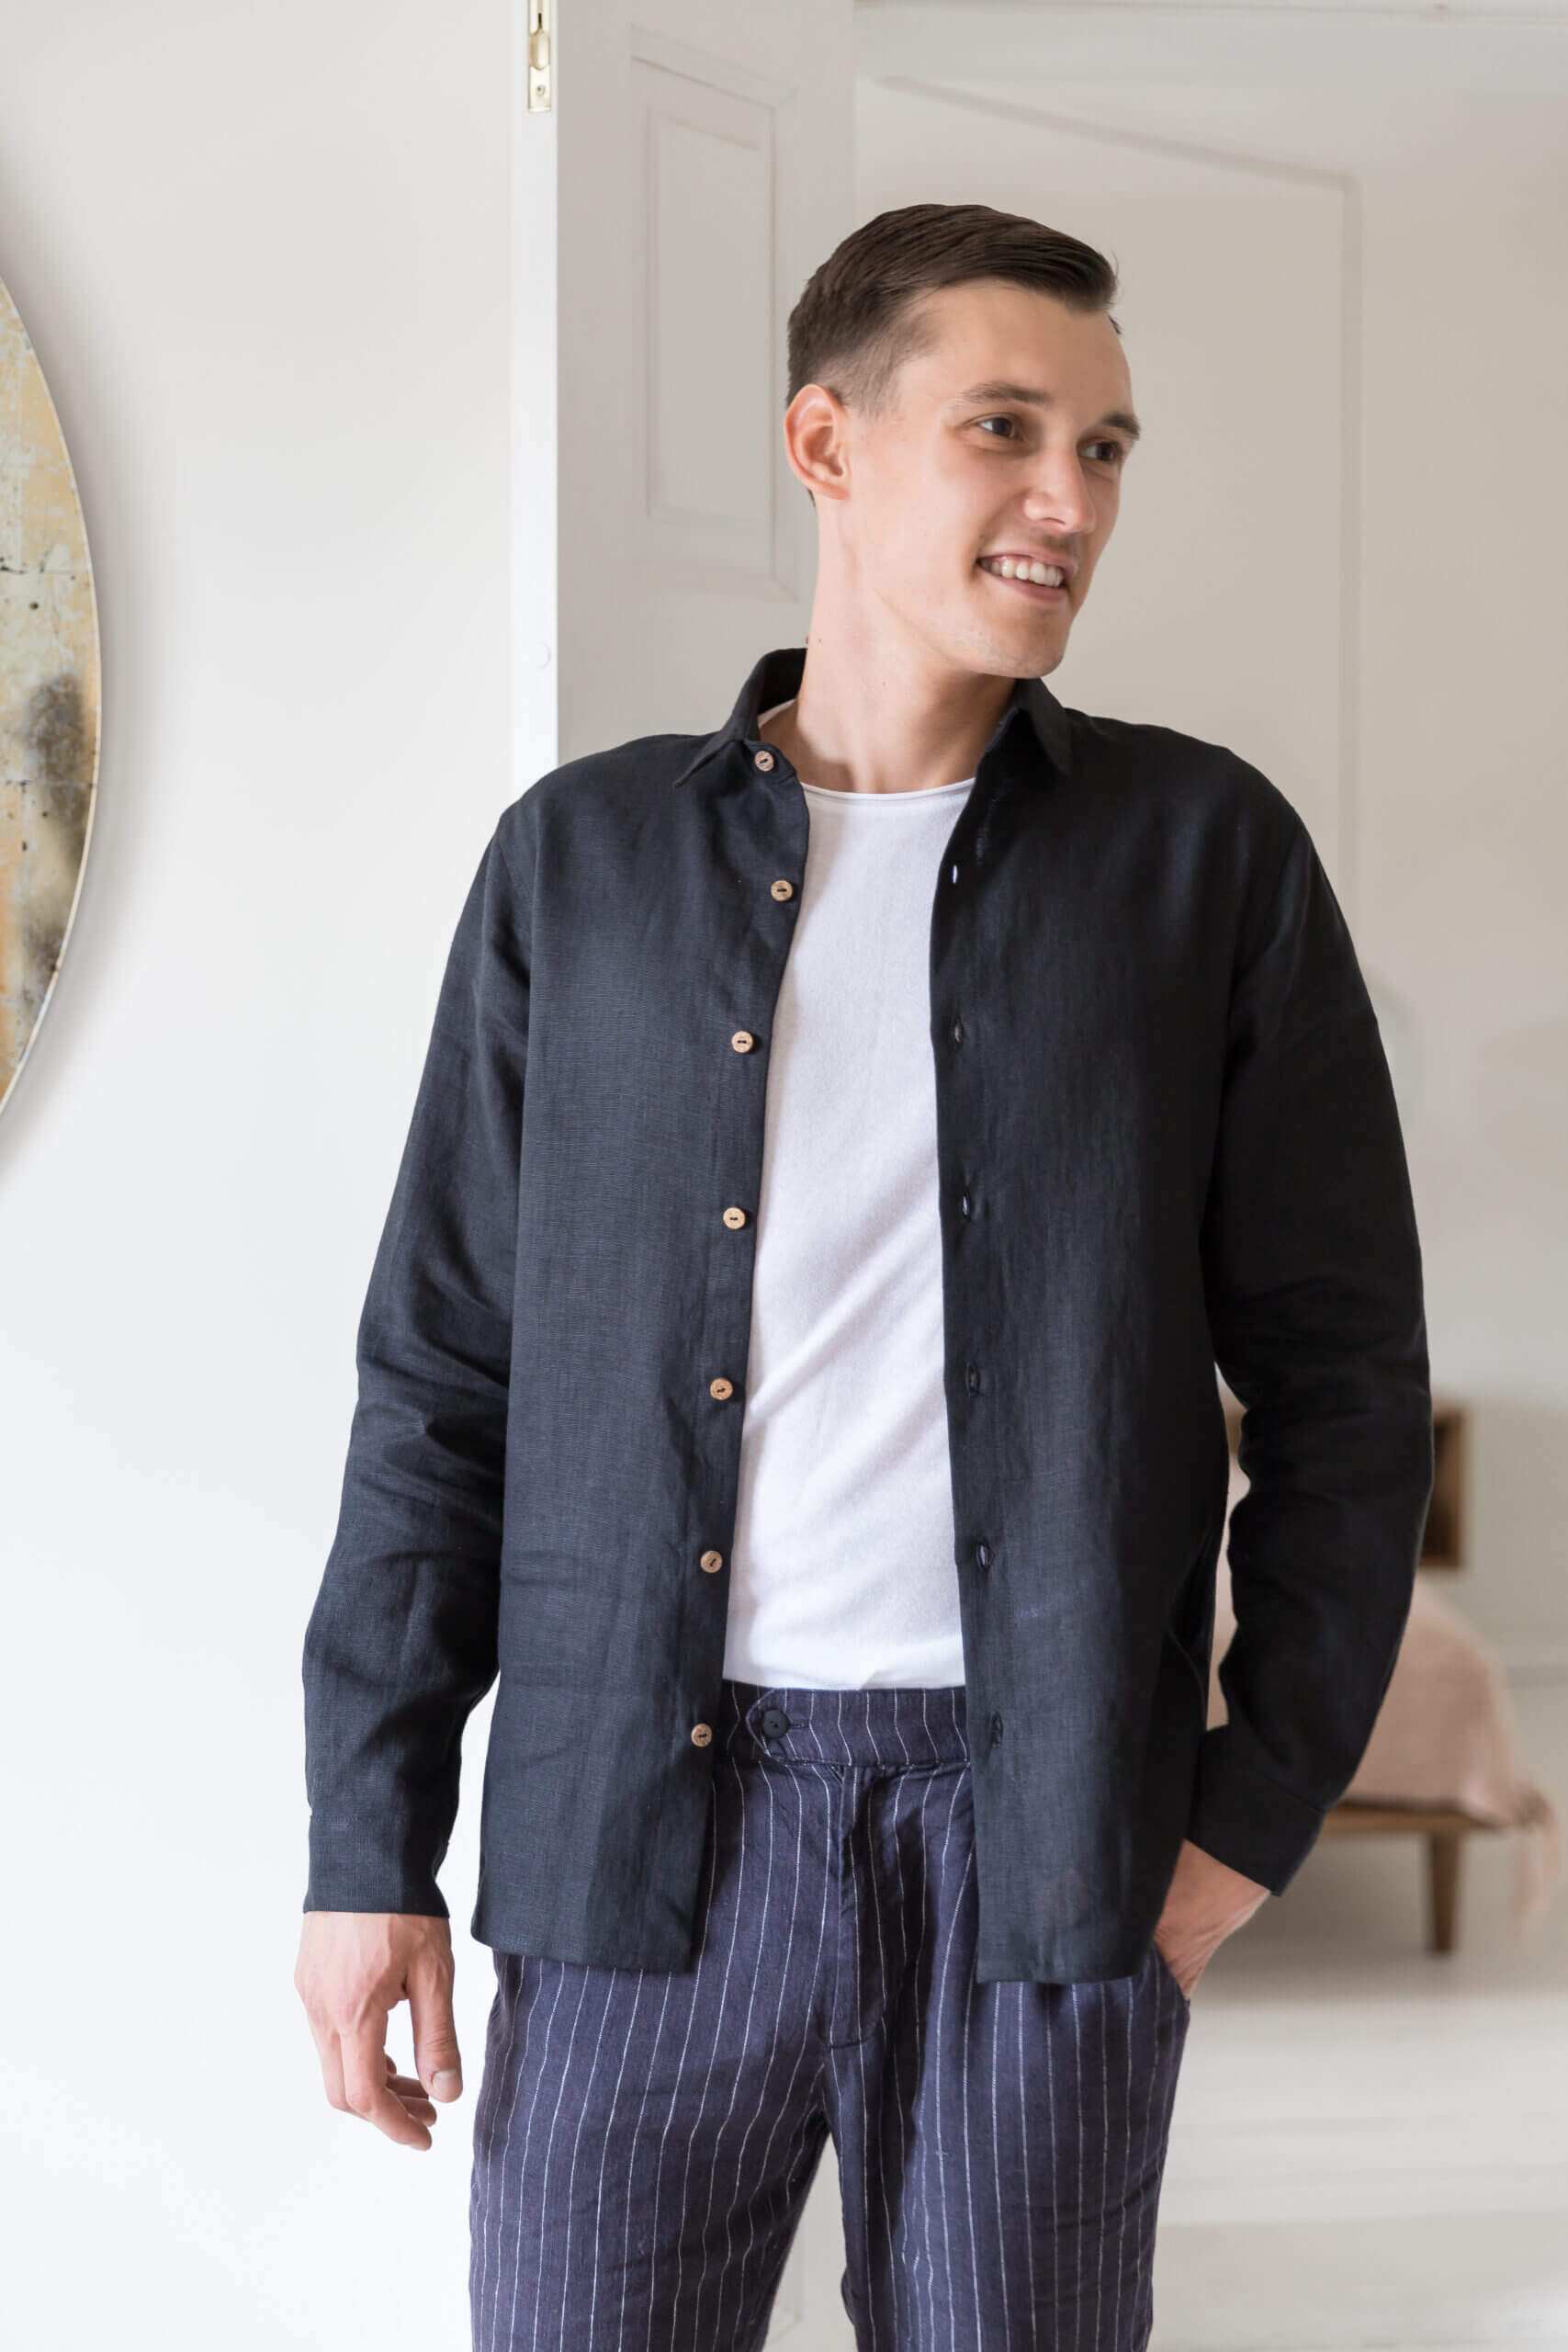 Black linen shirt casually styled with top button open